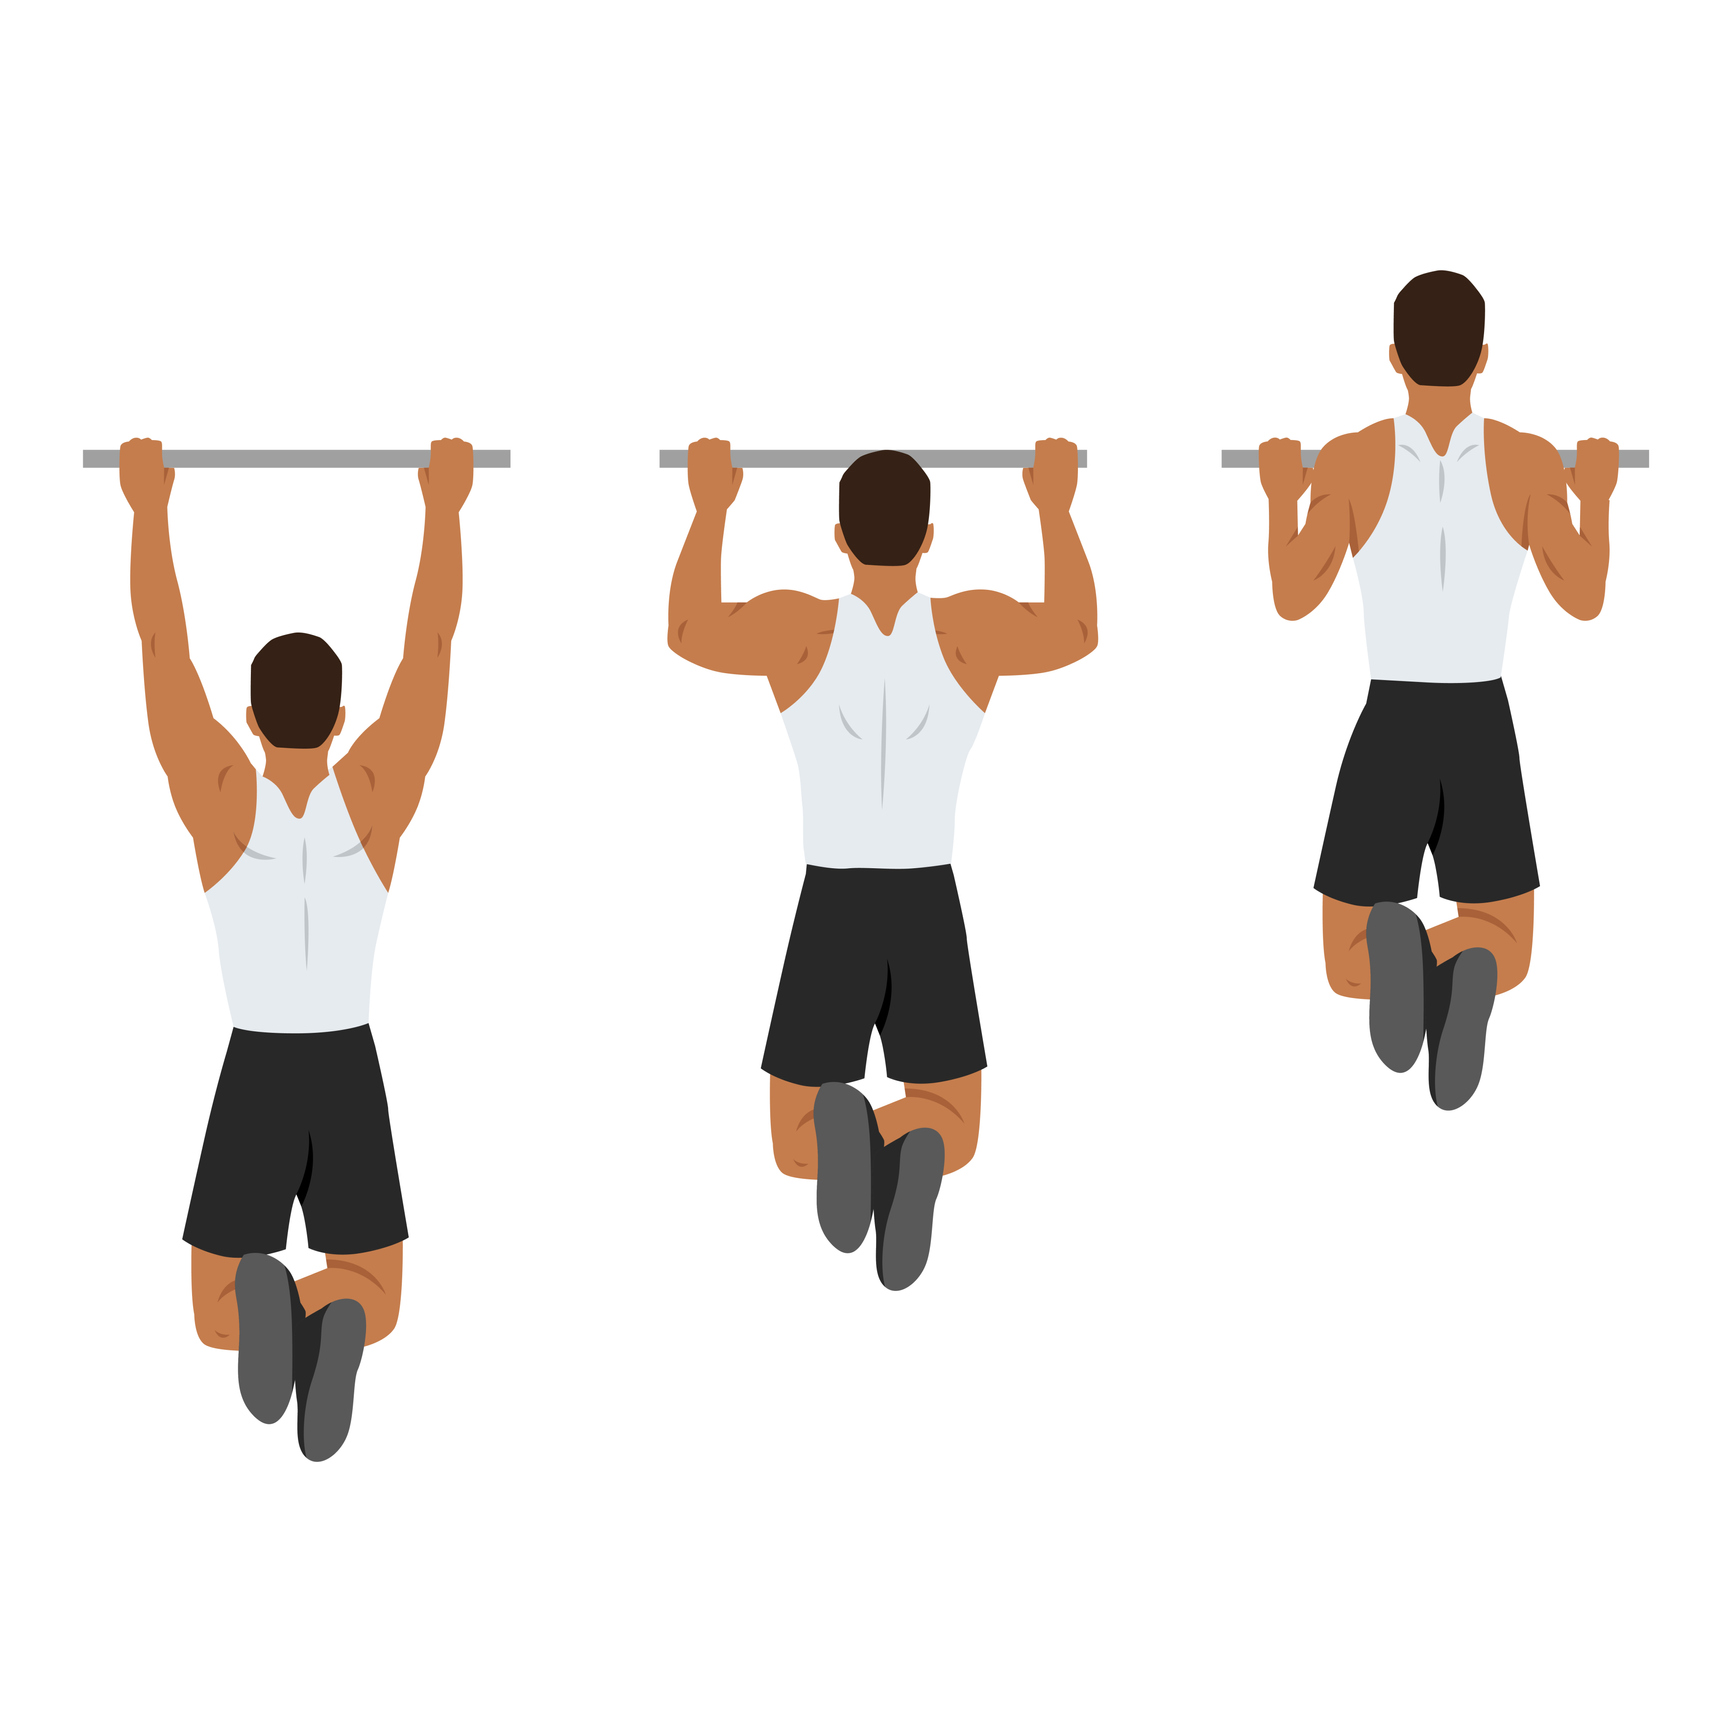 Trapeze shrugs are actually an exercise with your own body weight.